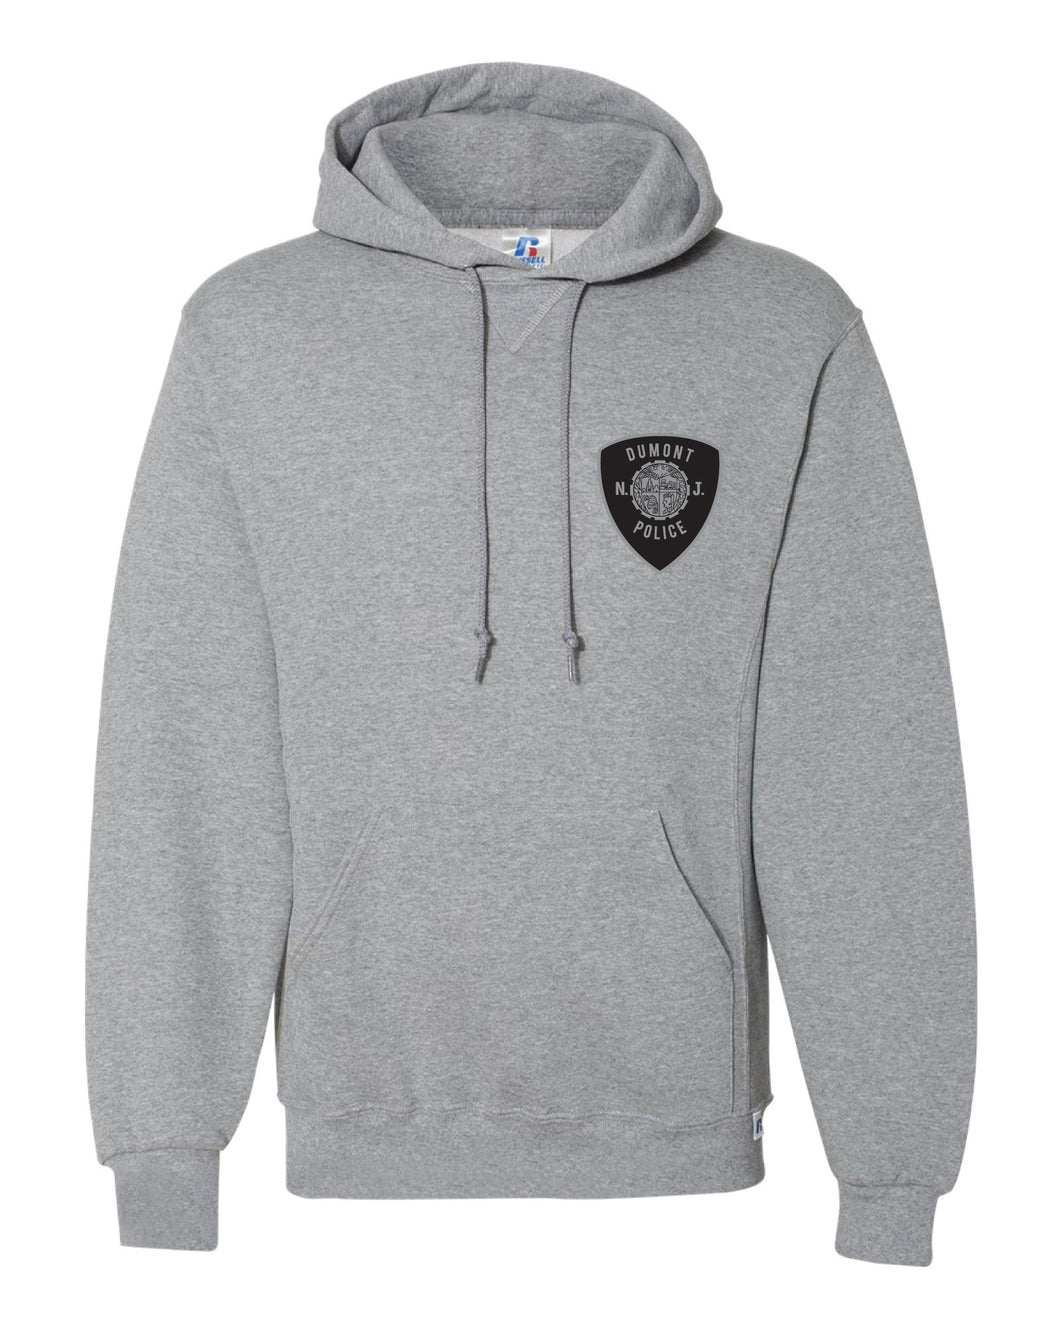 Dumont Police Russell Athletic Cotton Hoodie - Gray (Design 3) - 5KounT